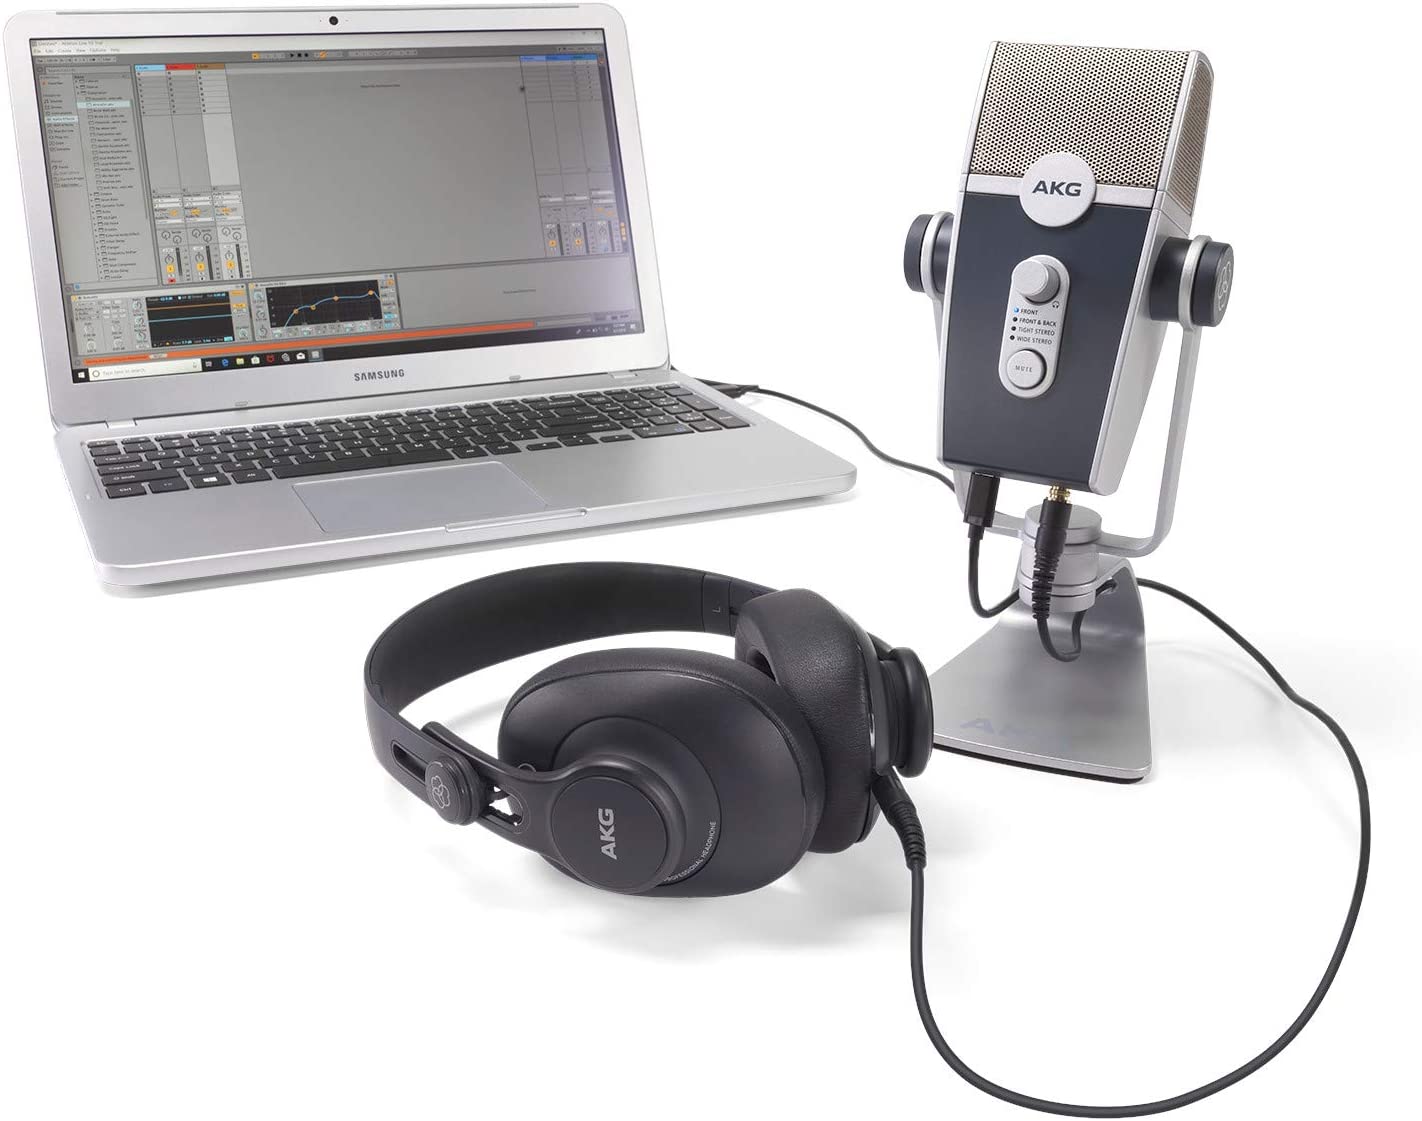 AKG Podcaster Essentials Lyra USB Microphone And K371 Headphones - CLEARANCE!